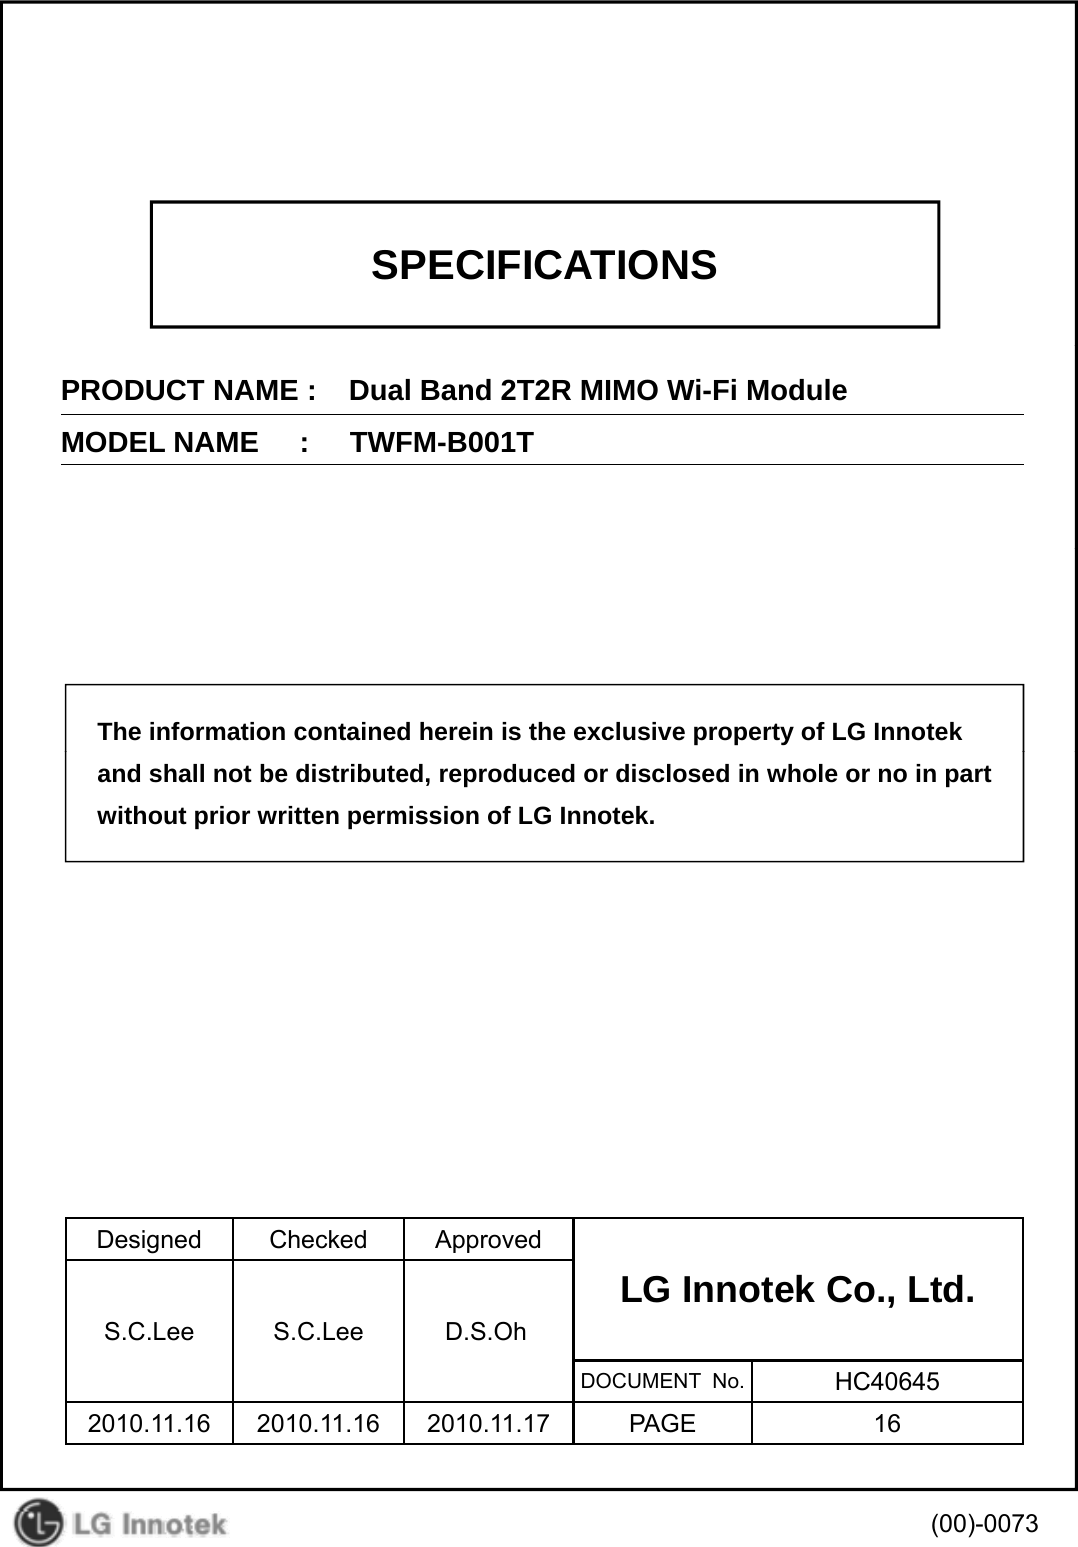 SPECIFICATIONSPRODUCT NAME :    Dual Band 2T2R MIMO Wi-Fi ModuleMODEL NAME     :     TWFM-B001TThe information contained herein is the exclusive property of LG Innotekand shall not be distributed, reproduced or disclosed in whole or no in partwithout prior written permission of LG Innotek.Designed Checked ApprovedLG Innotek Co., Ltd.   S.C.Lee S.C.Lee D.S.OhDOCUMENT  No. HC406452010.11.16 2010.11.16 2010.11.17 PAGE 16(00)-0073